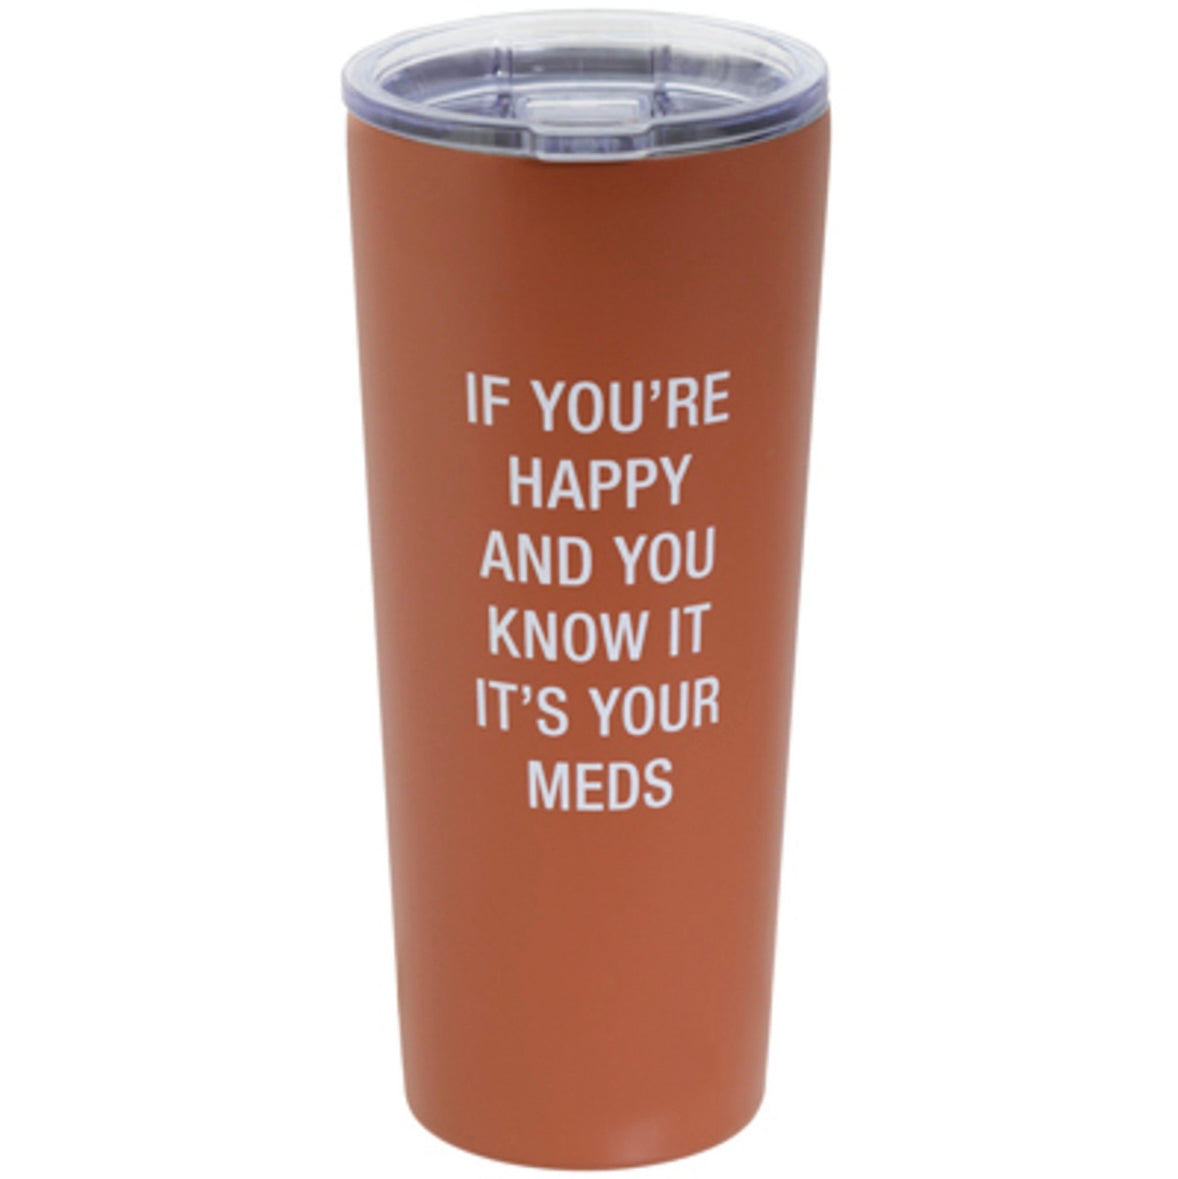 22oz "If You're Happy" Double Walled Stainless Steel Travel Tumbler - Leak Proof